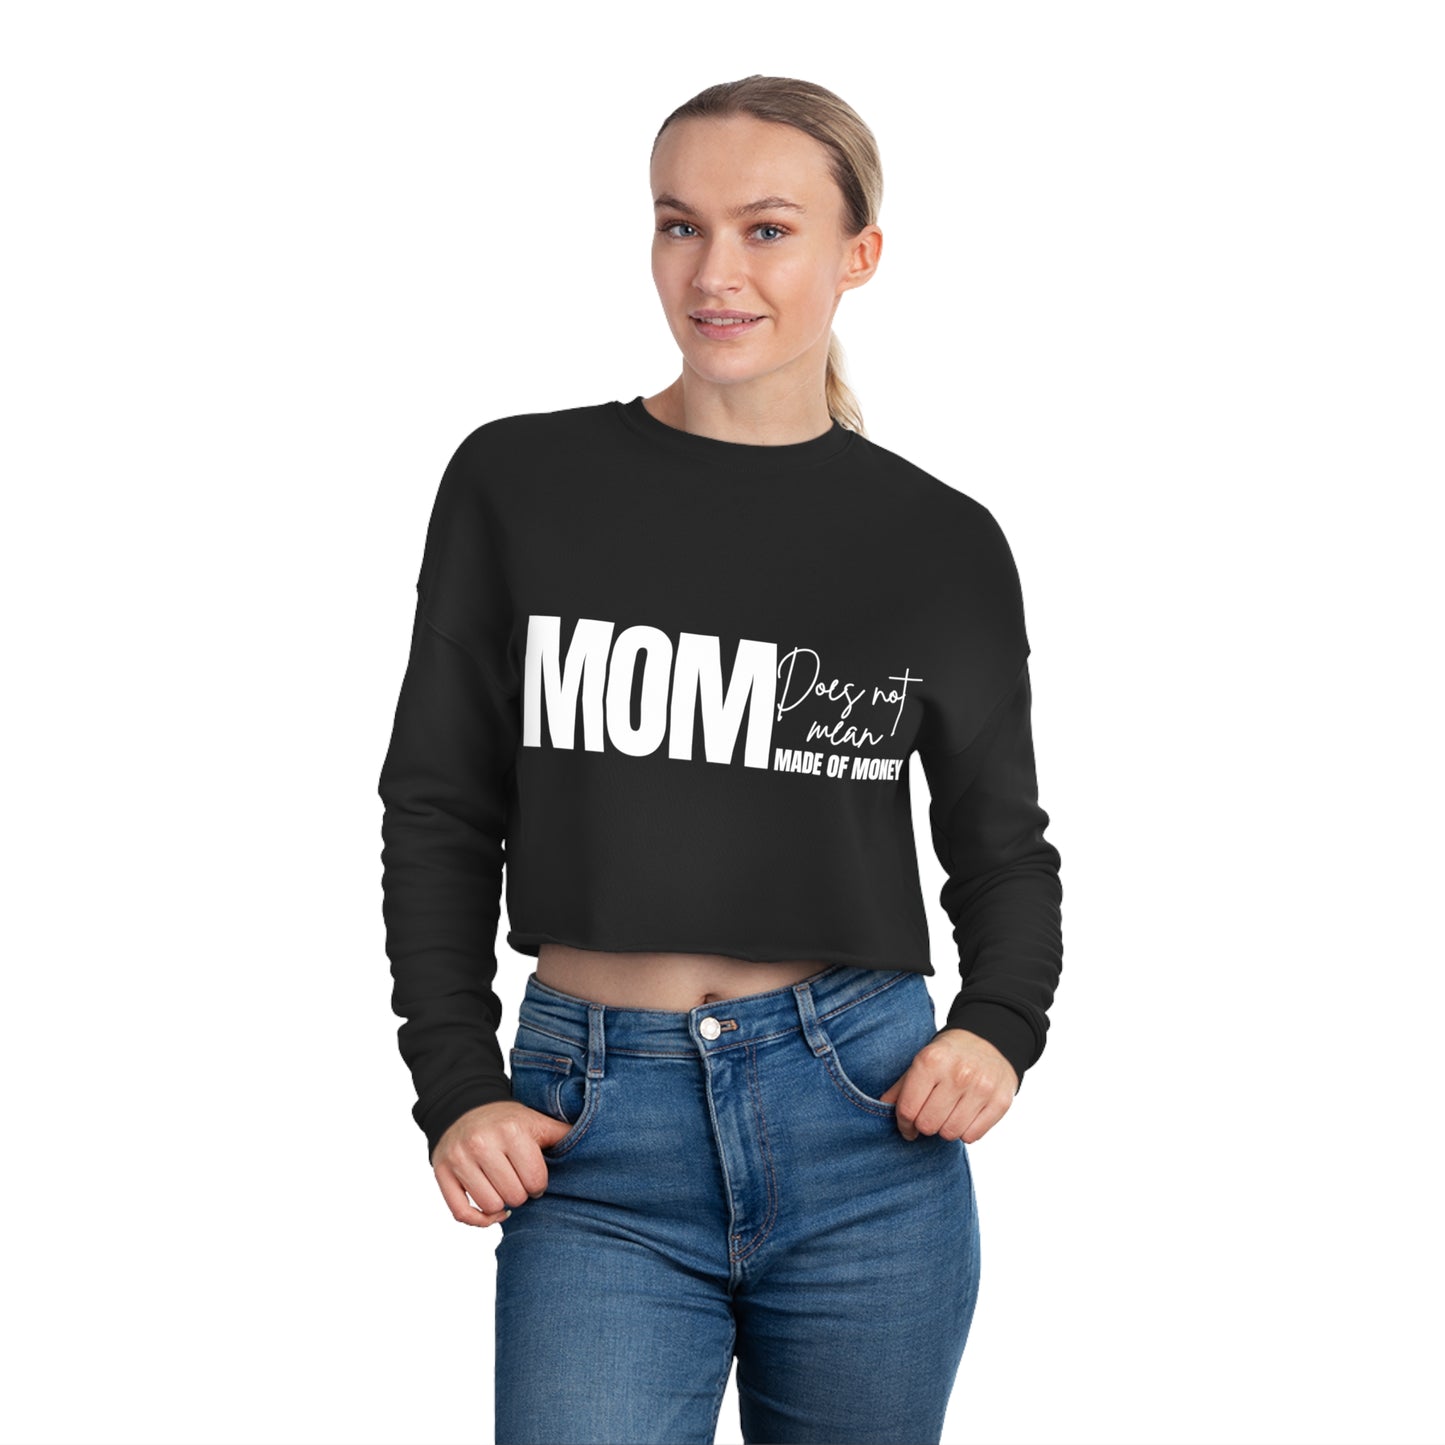 'MOM does not mean Made of Money' Women's Cropped Sweatshirt